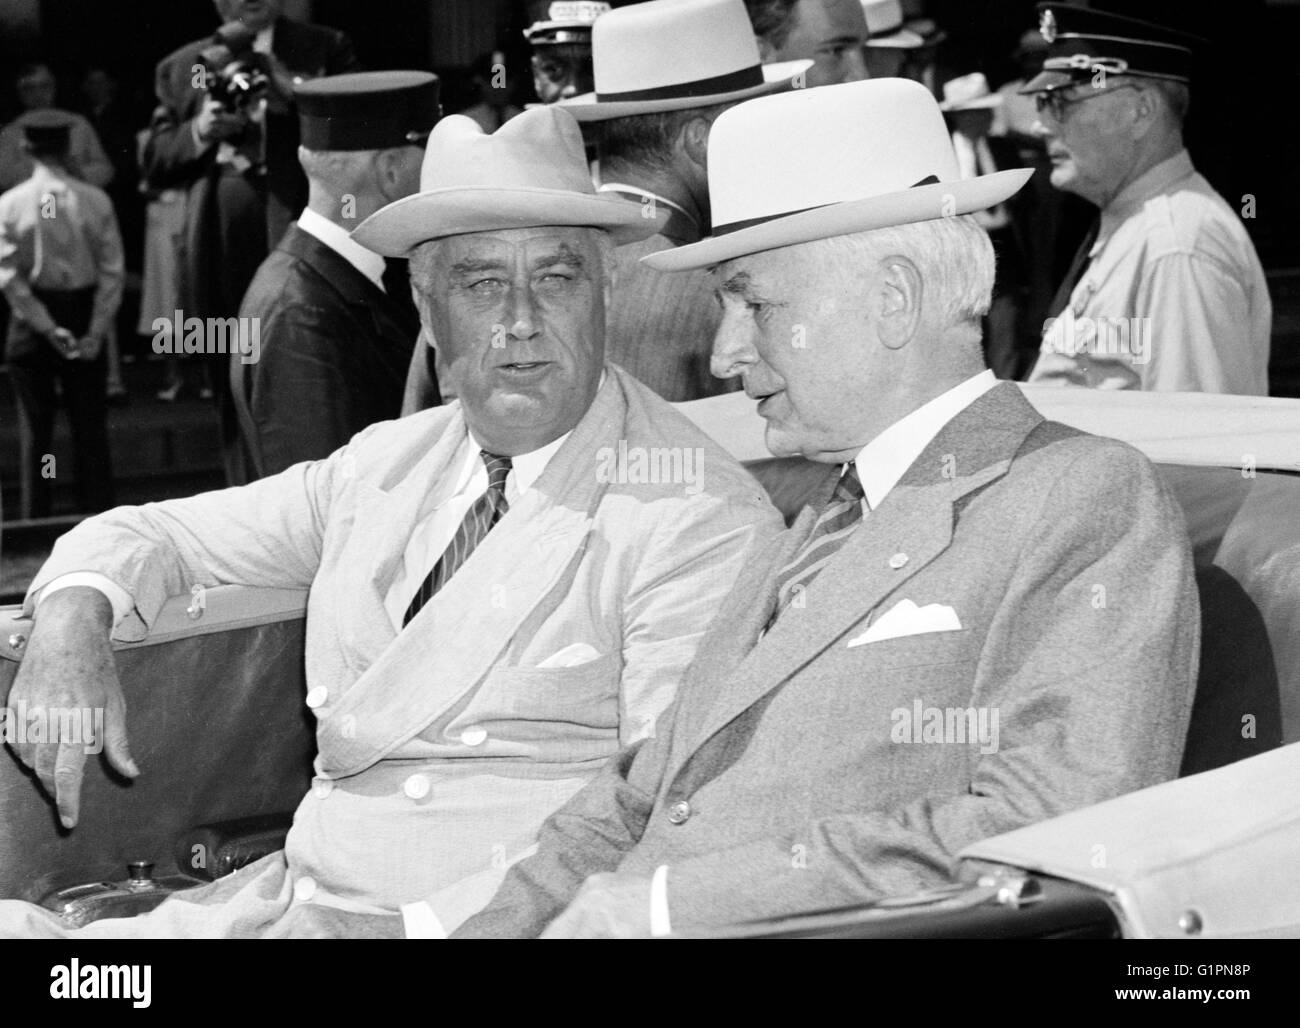 ROOSEVELT AND HULL, 1939.  President Franklin Delano Roosevelt and Secretary of State Cordell Hull in Washington, D.C. Photograph, 24 August 1939. Stock Photo